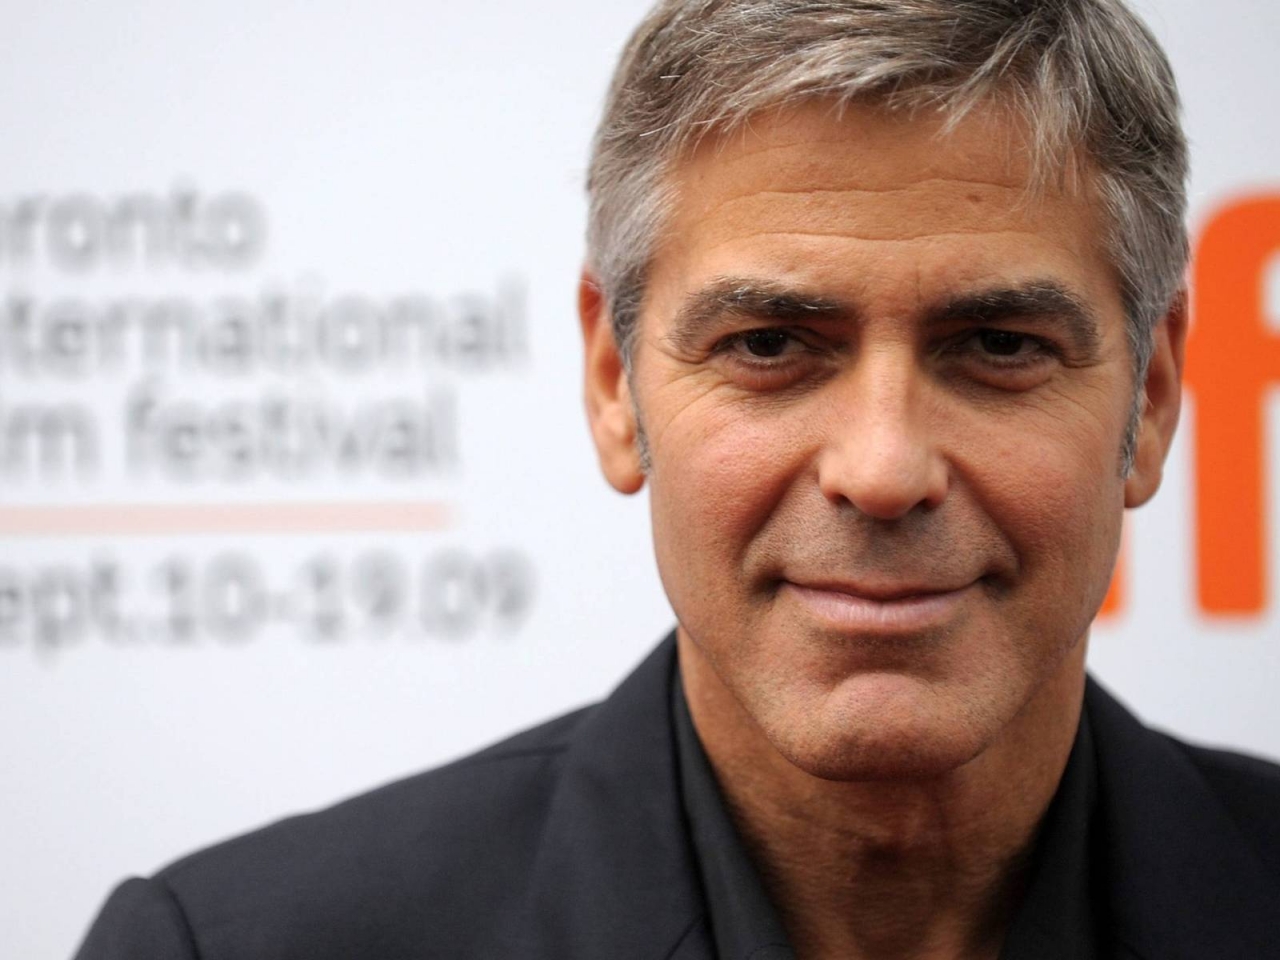 George Clooney Smile for 1280 x 960 resolution